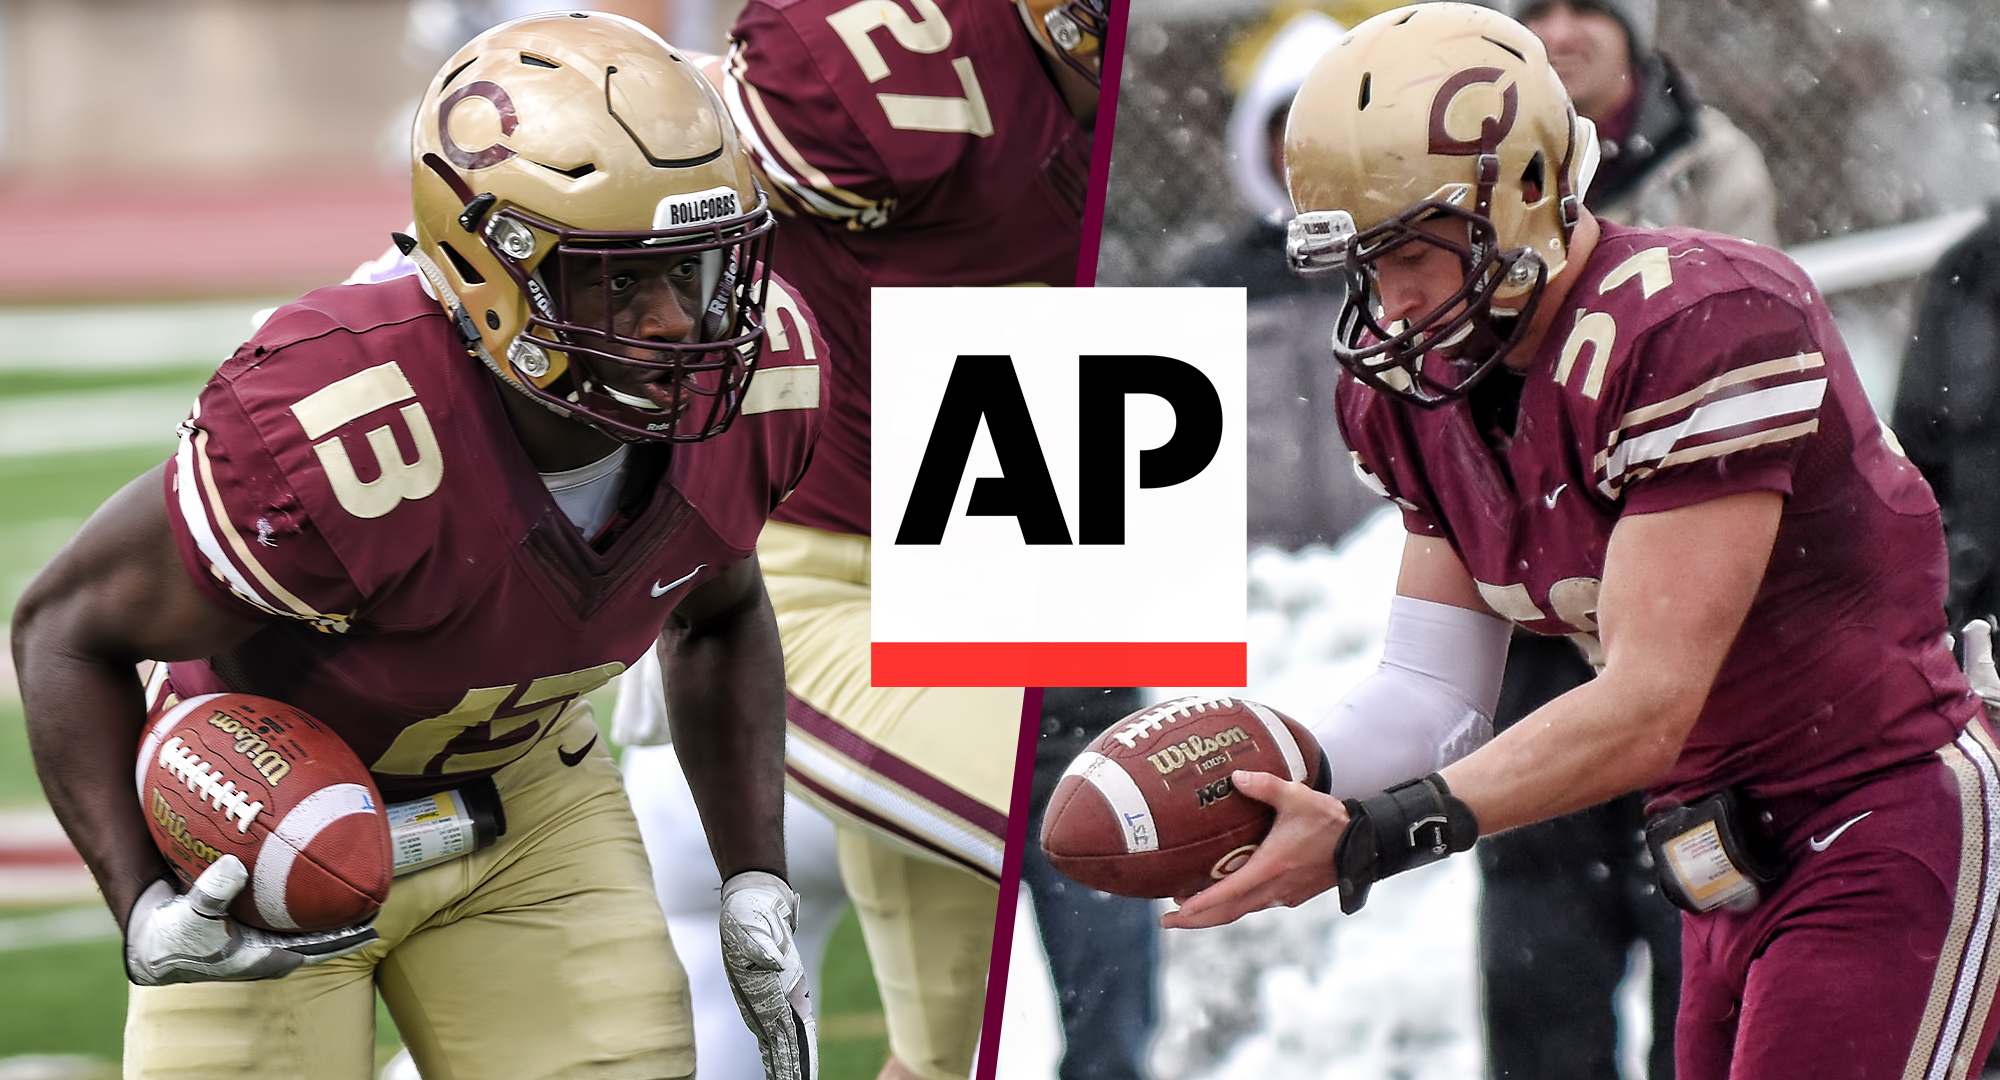 Cobber seniors Willie Julkes (L) and Alex Berg were both named the AP All-American Teams.